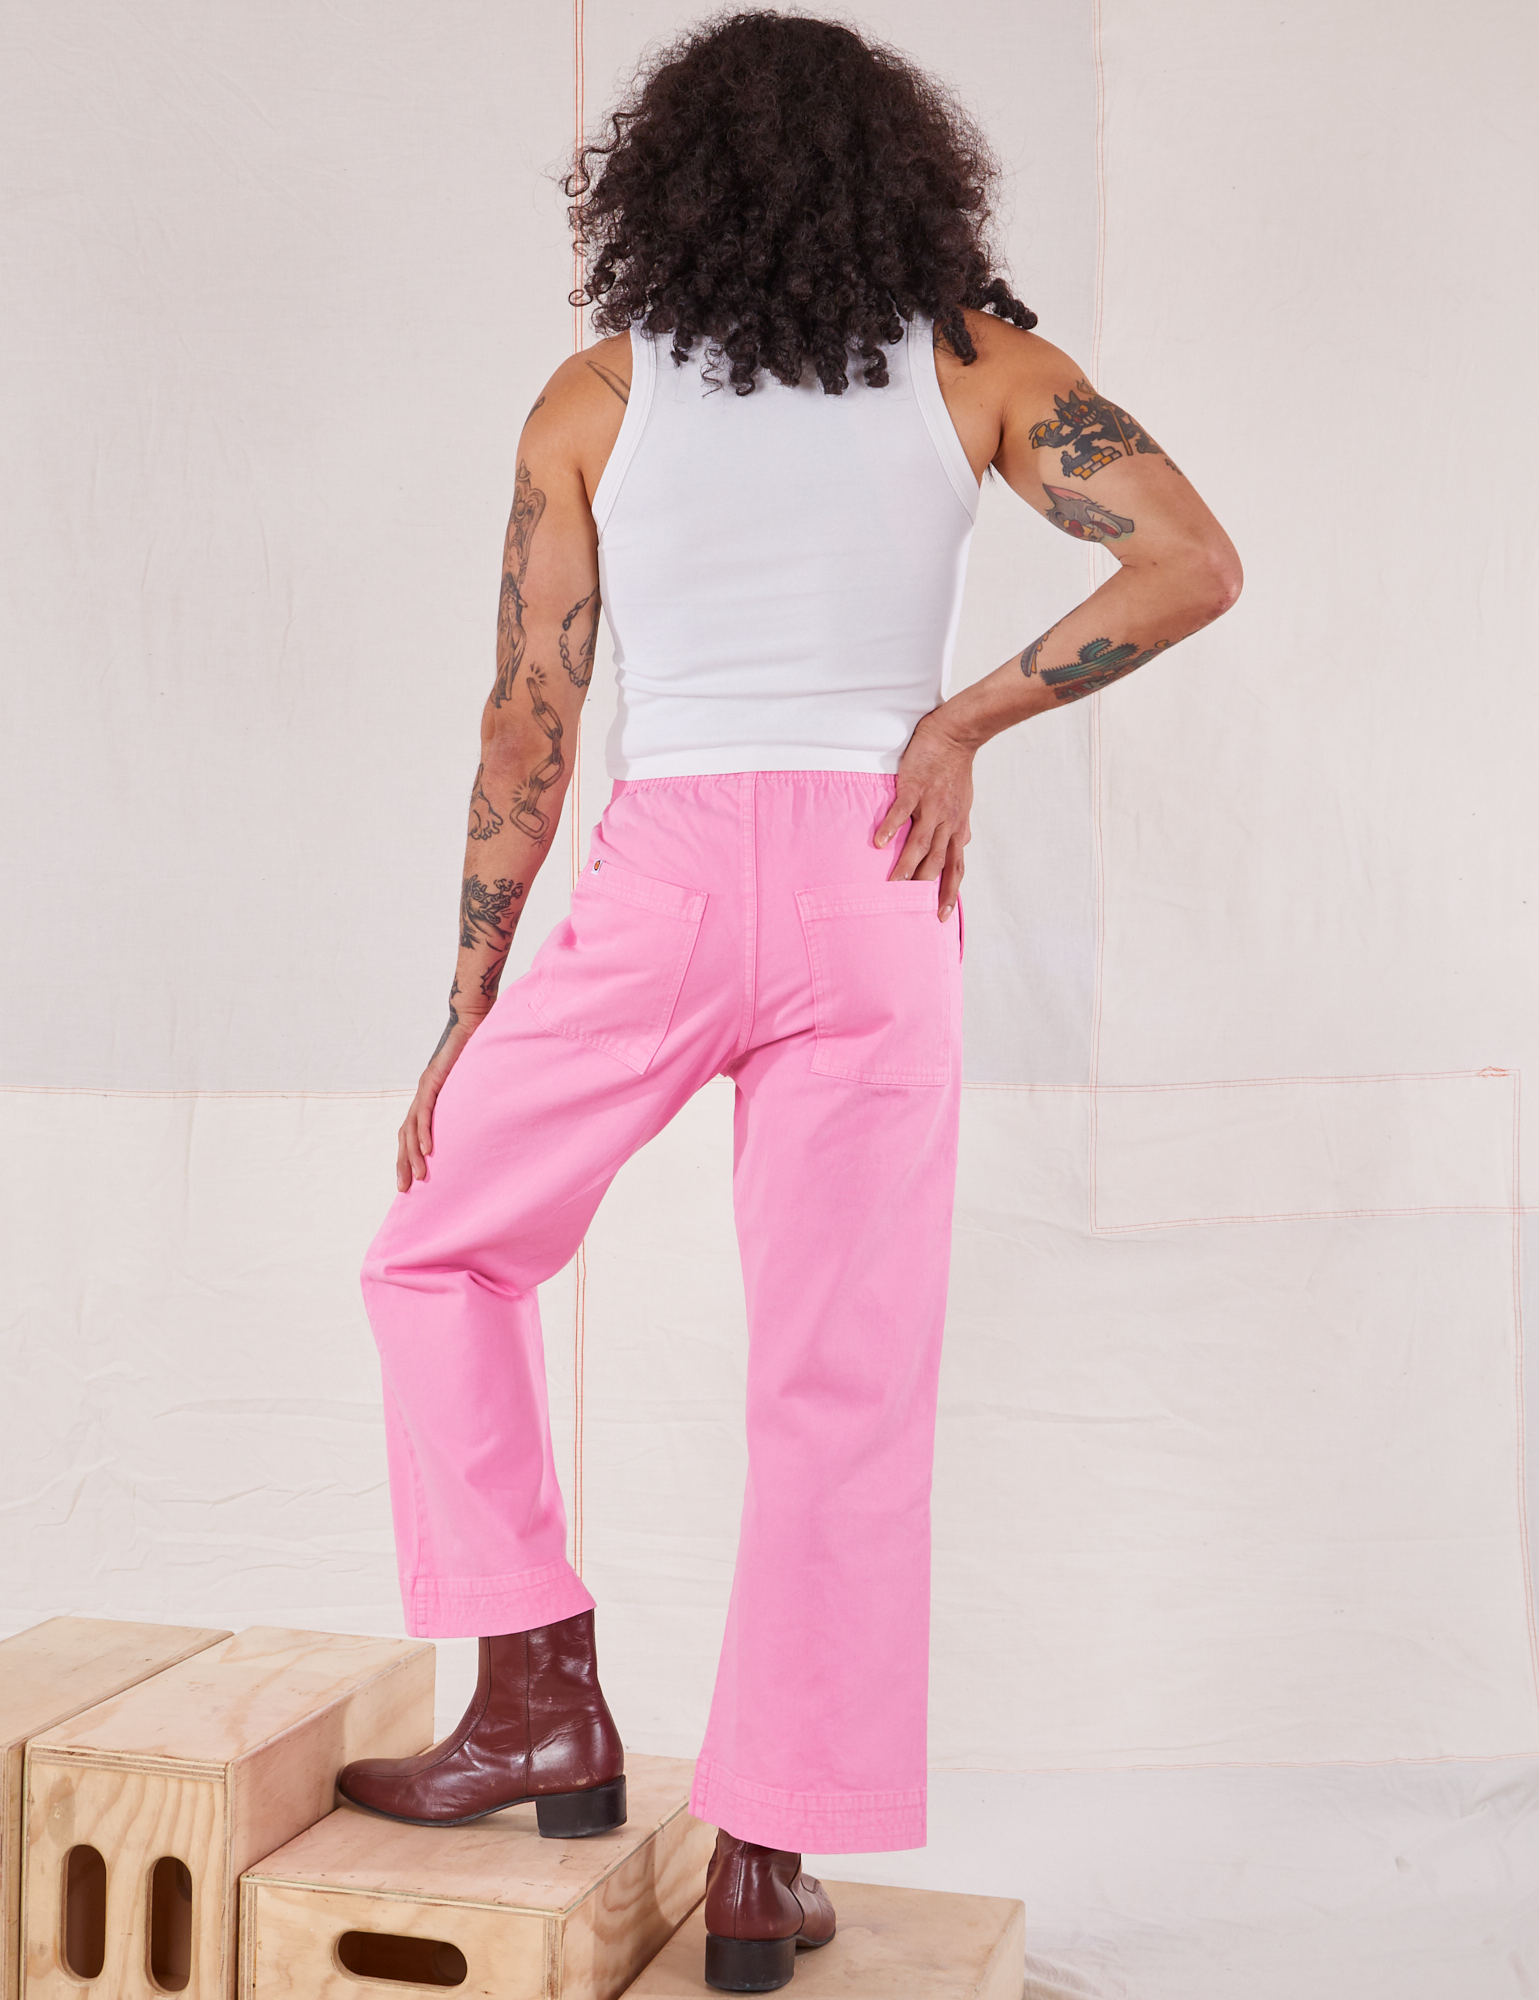 Back view of Action Pants in Bubblegum Pink and Cropped Tank in vintage tee off-white worn by Jesse